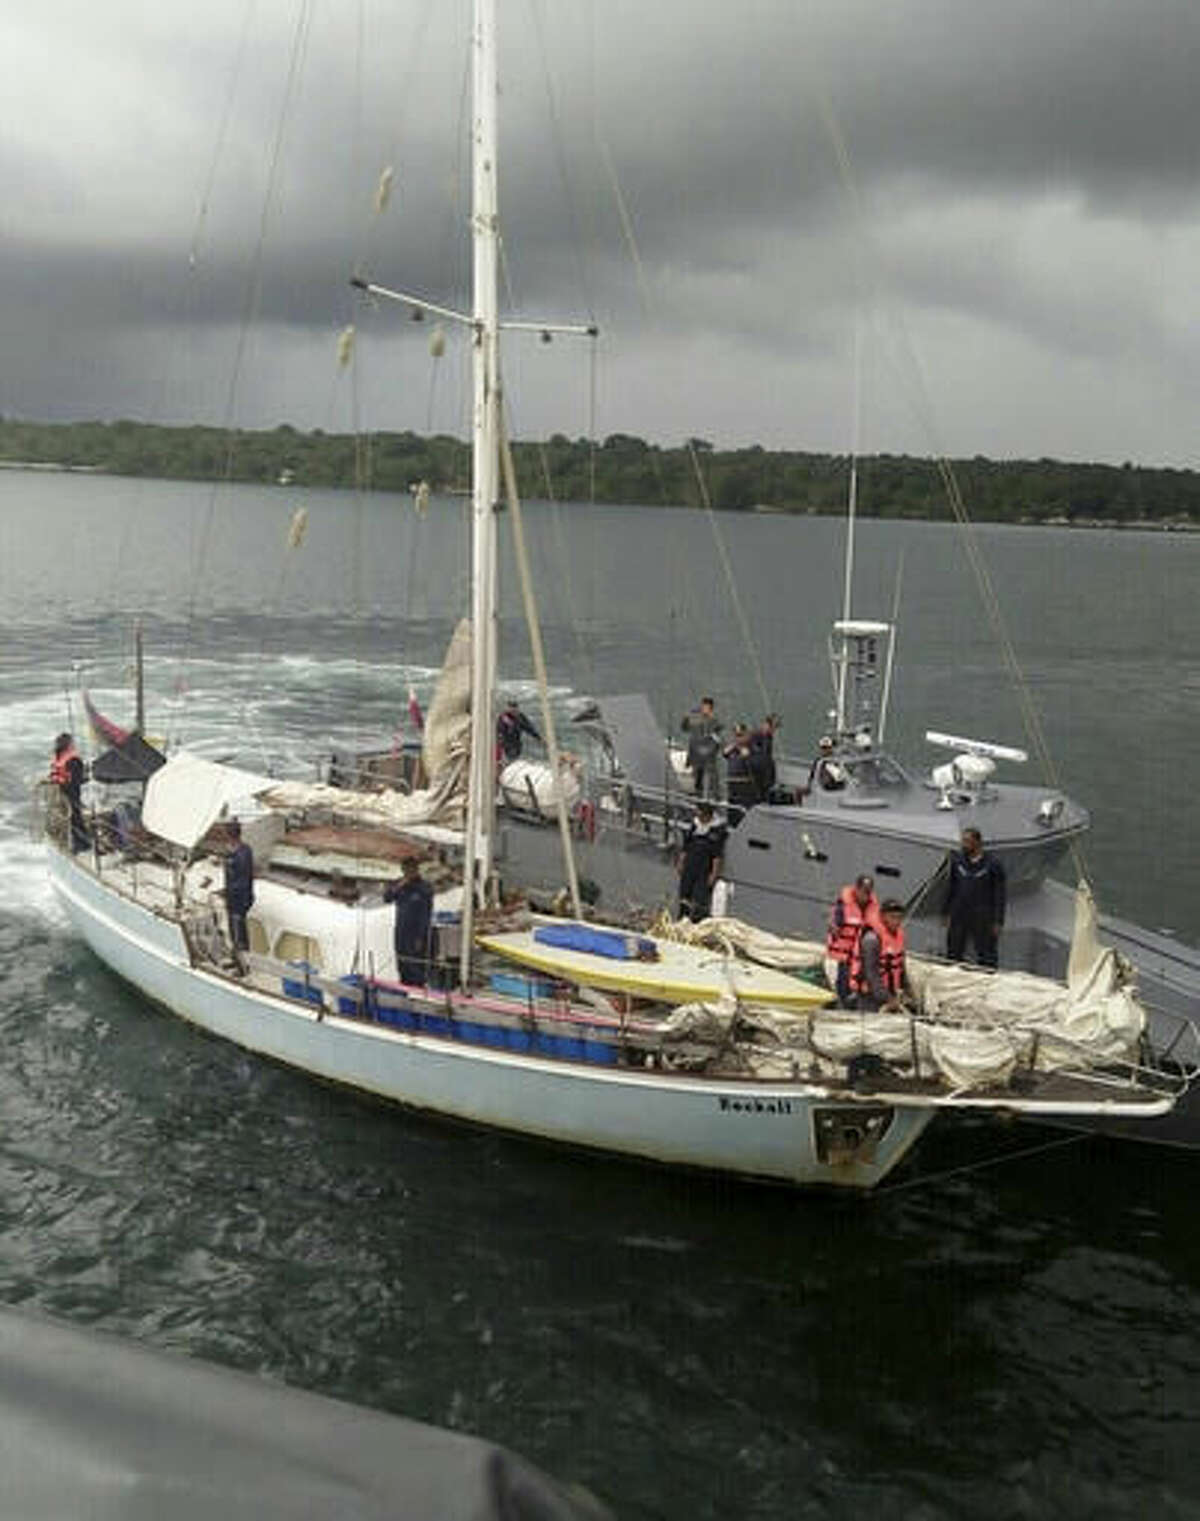 In this photo provided by the Armed Forces of the Philippines Western Mindanao Command (WESMINCOM) and authorized for distribution by Army Maj. Filemon Tan Jr. Monday, Nov. 7, 2016, Philippine Navy board the yacht marked "Rockall" after being found abandoned off the Sulu Sea in southern Philippines over the weekend. The Philippine military is verifying a claim by Abu Sayyaf militants that they have kidnapped a German man from the yacht and shot and killed his female companion, whose suspected body was found on the abandoned boat, military officials said Monday. Regional military spokesman Maj. Filemon Tan said Abu Sayyaf spokesman Muamar Askali had claimed the militants kidnapped Juegen Kantner and killed his companion while the couple were cruising off neighboring Malaysia's Sabah state. (WESMINCOM via AP)